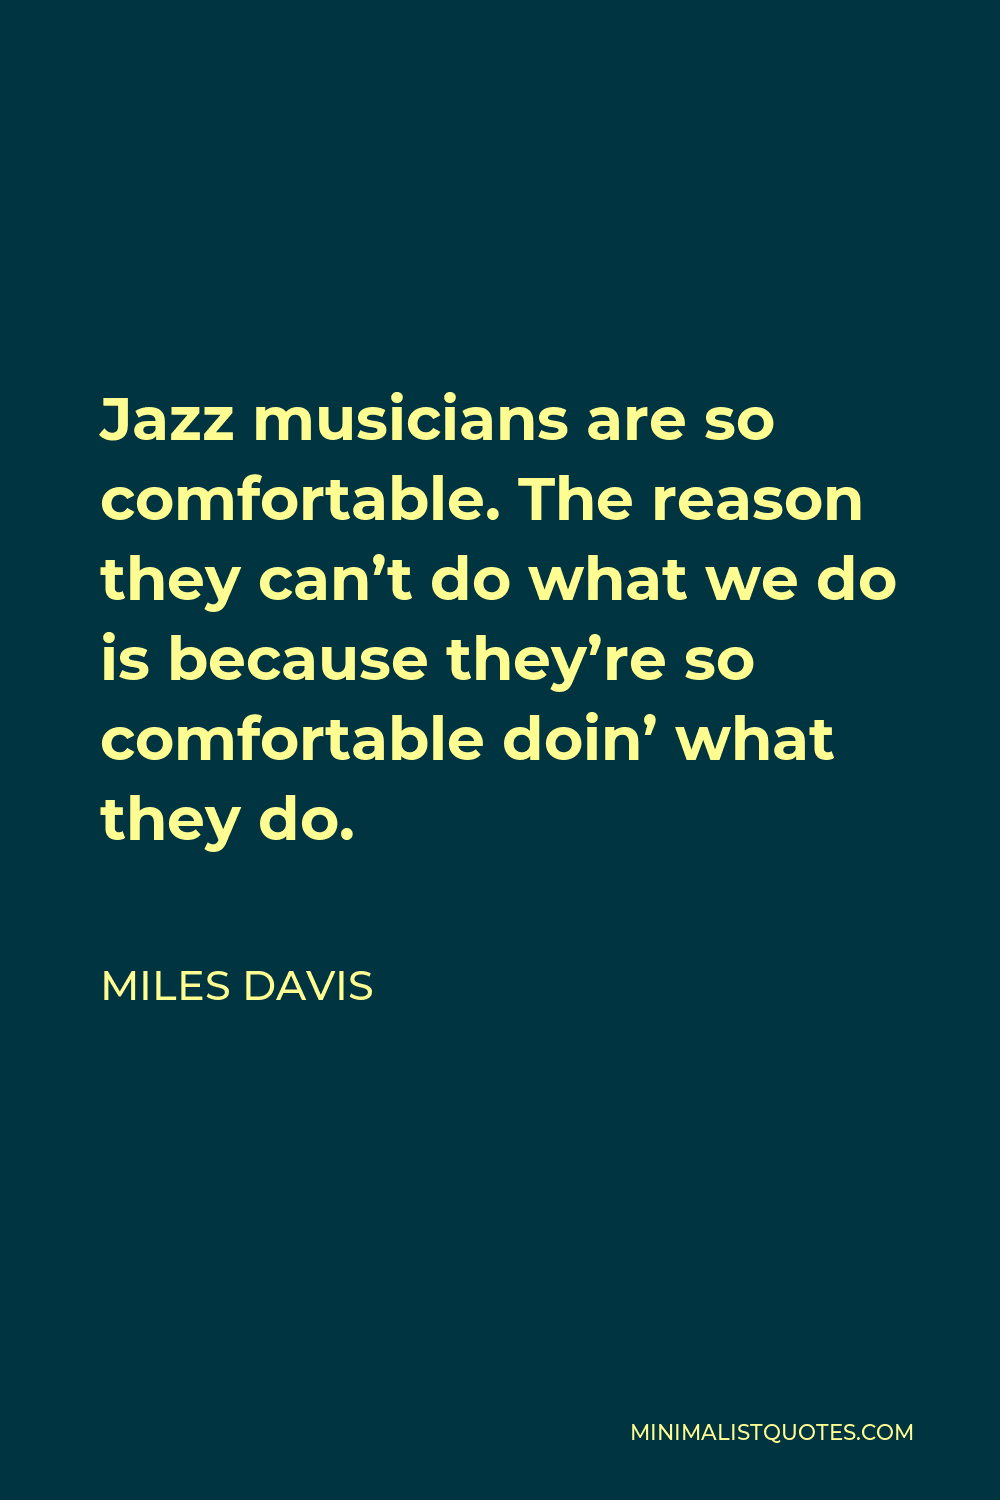 Miles Davis Quote - Jazz musicians are so comfortable. The reason they can’t do what we do is because they’re so comfortable doin’ what they do.